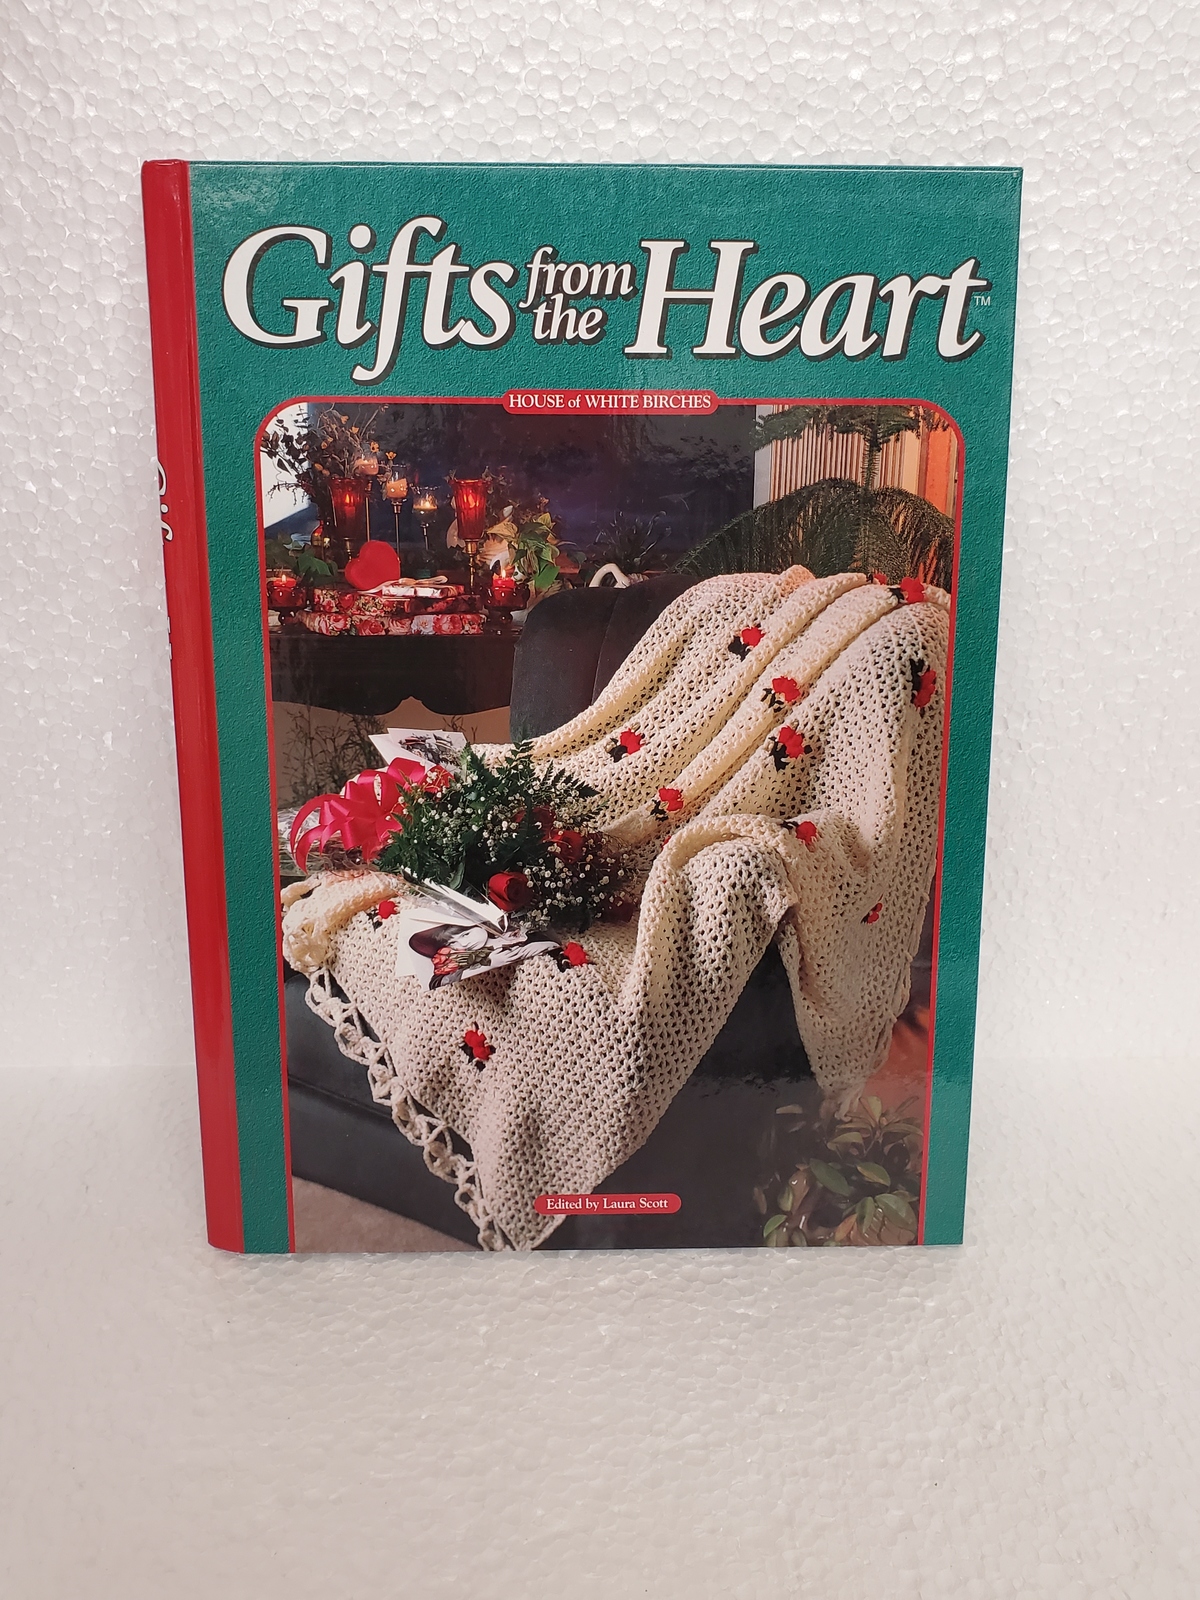 Gifts of the heart crochet book by house of white birches 1997 - $15.00